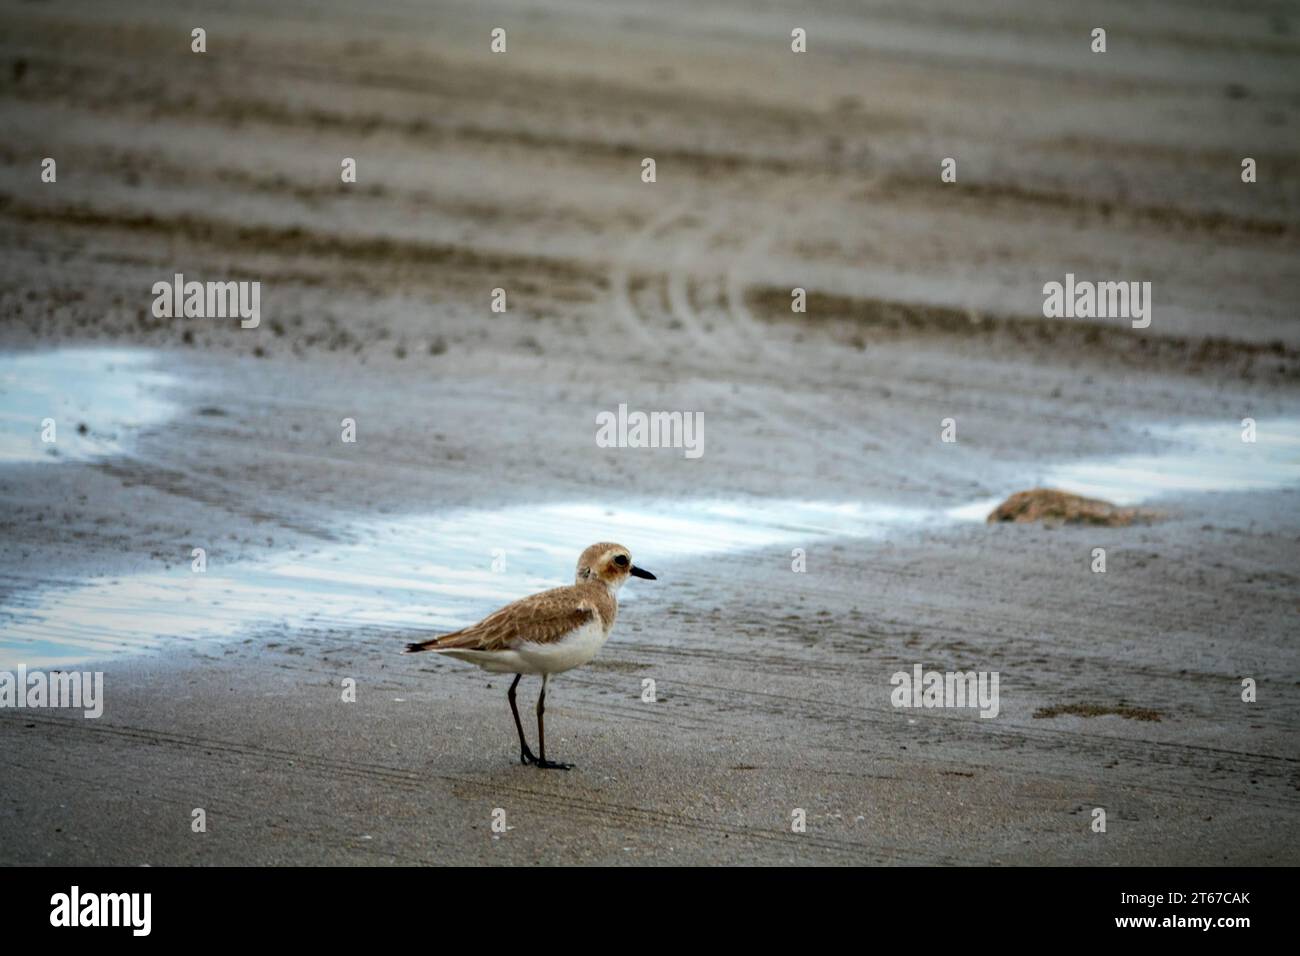 Bandar Abbas, Iran, January. Greater sand plover (Charadrius leschenaultii) on Strait of Hormuz as wintering place and feeding in surf interstitial fa Stock Photo